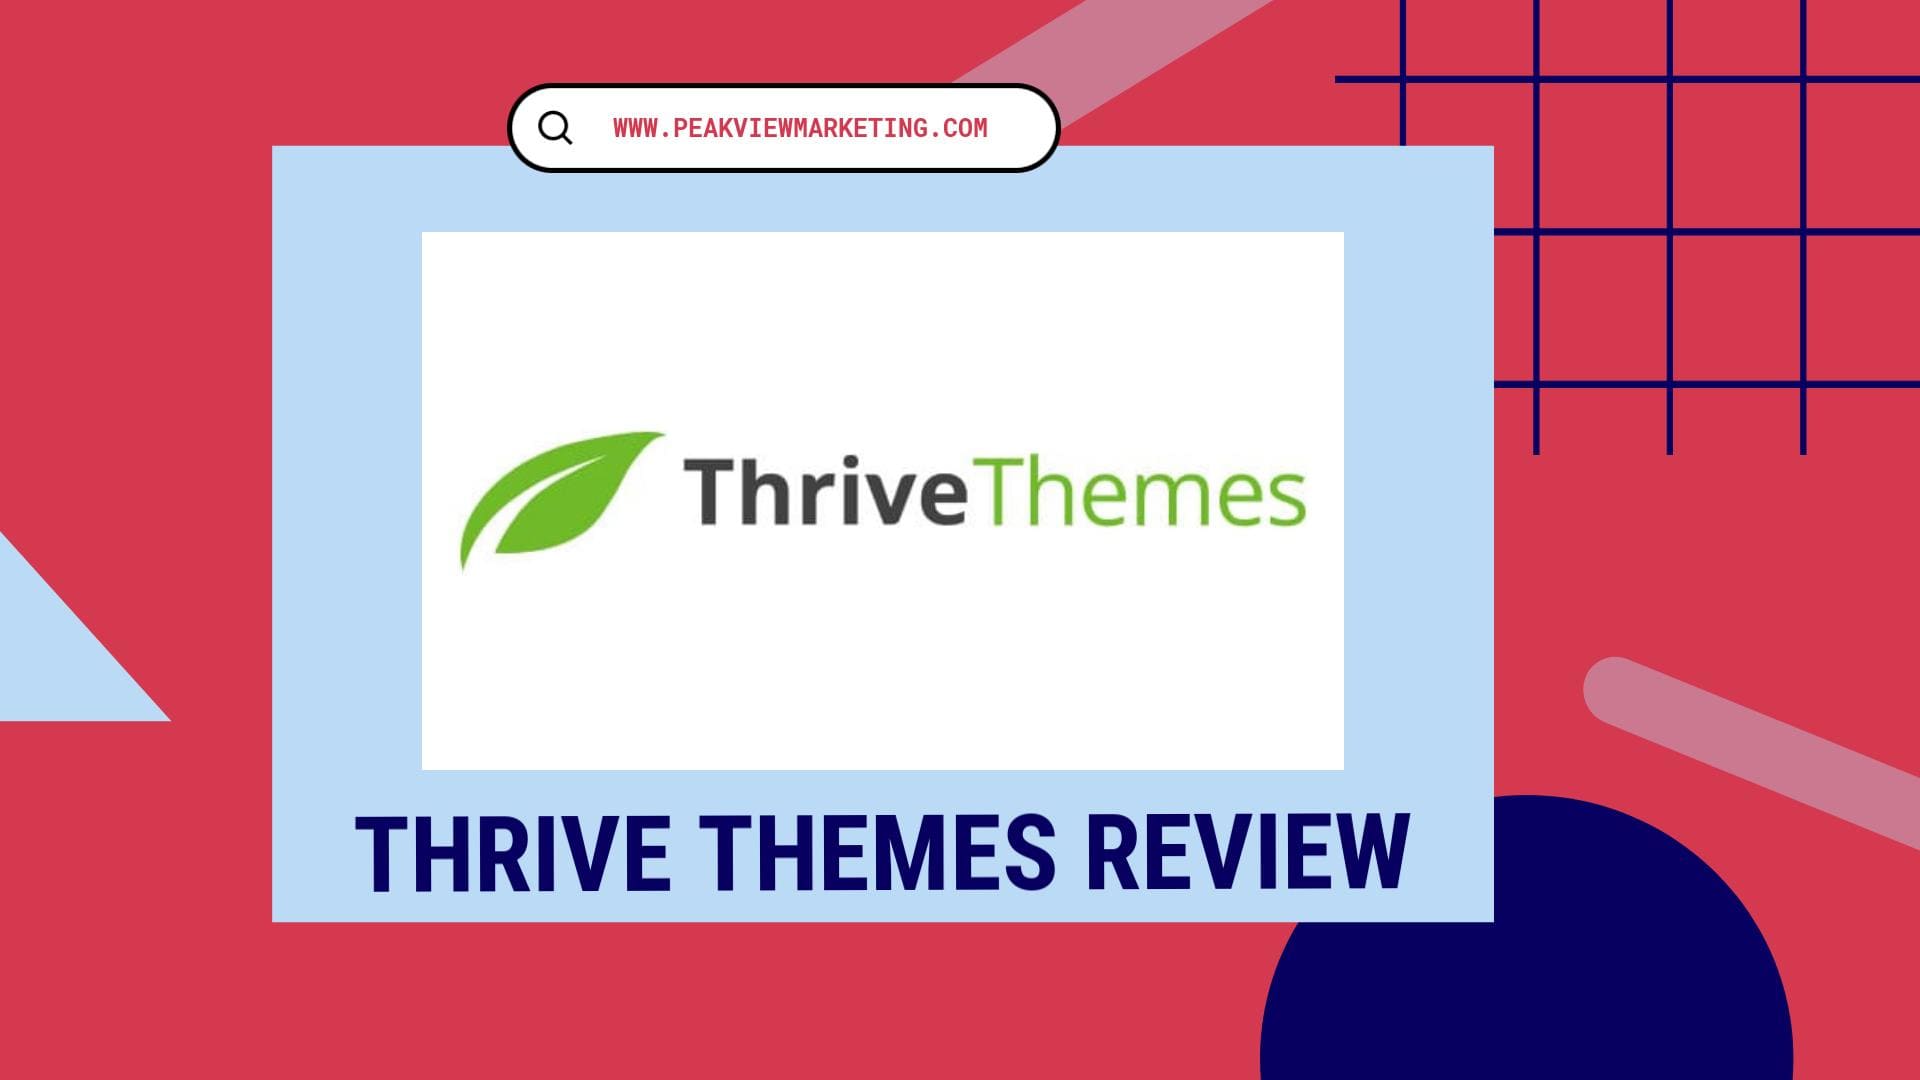 Thrive Themes Review Image